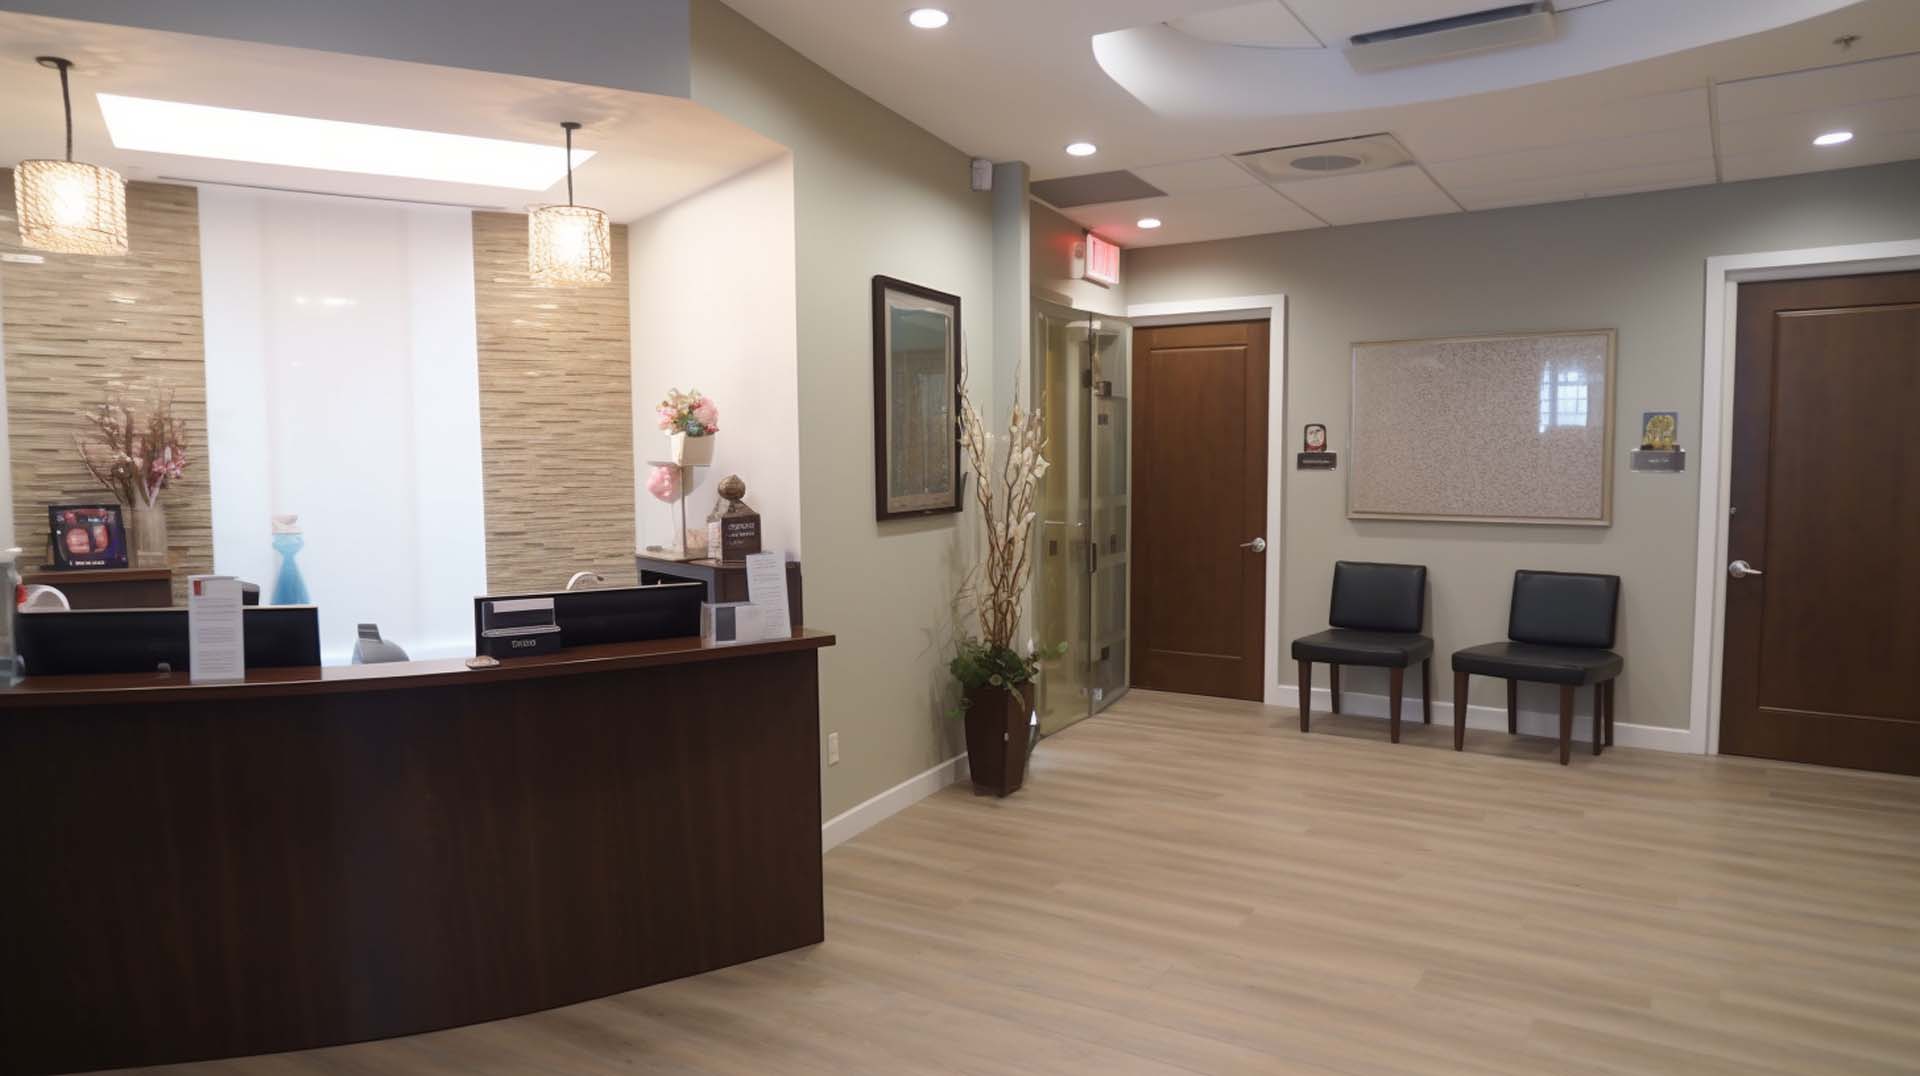 Cosmetic surgery clinics near me in Brantford, Ontario